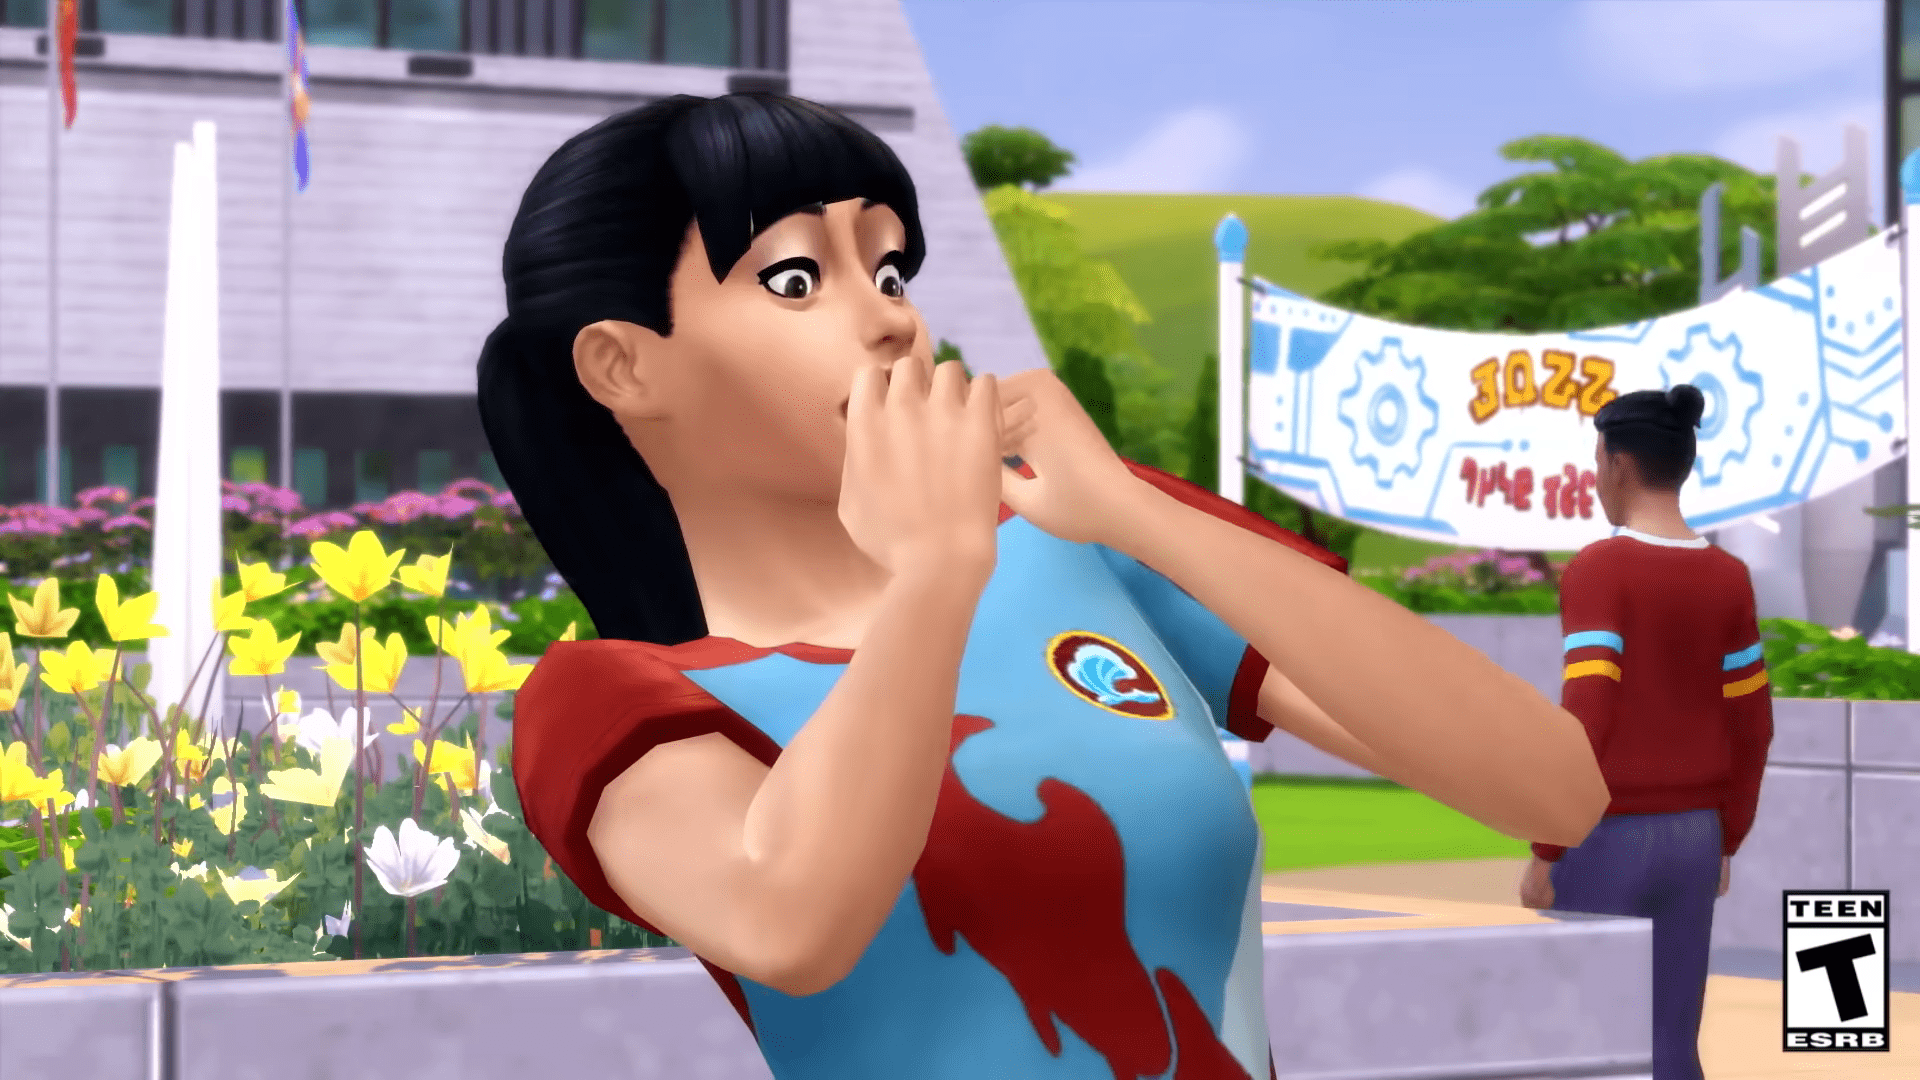 The Most Recent Sims 4 Update Is Causing Excessive Crashing On PC And Consoles